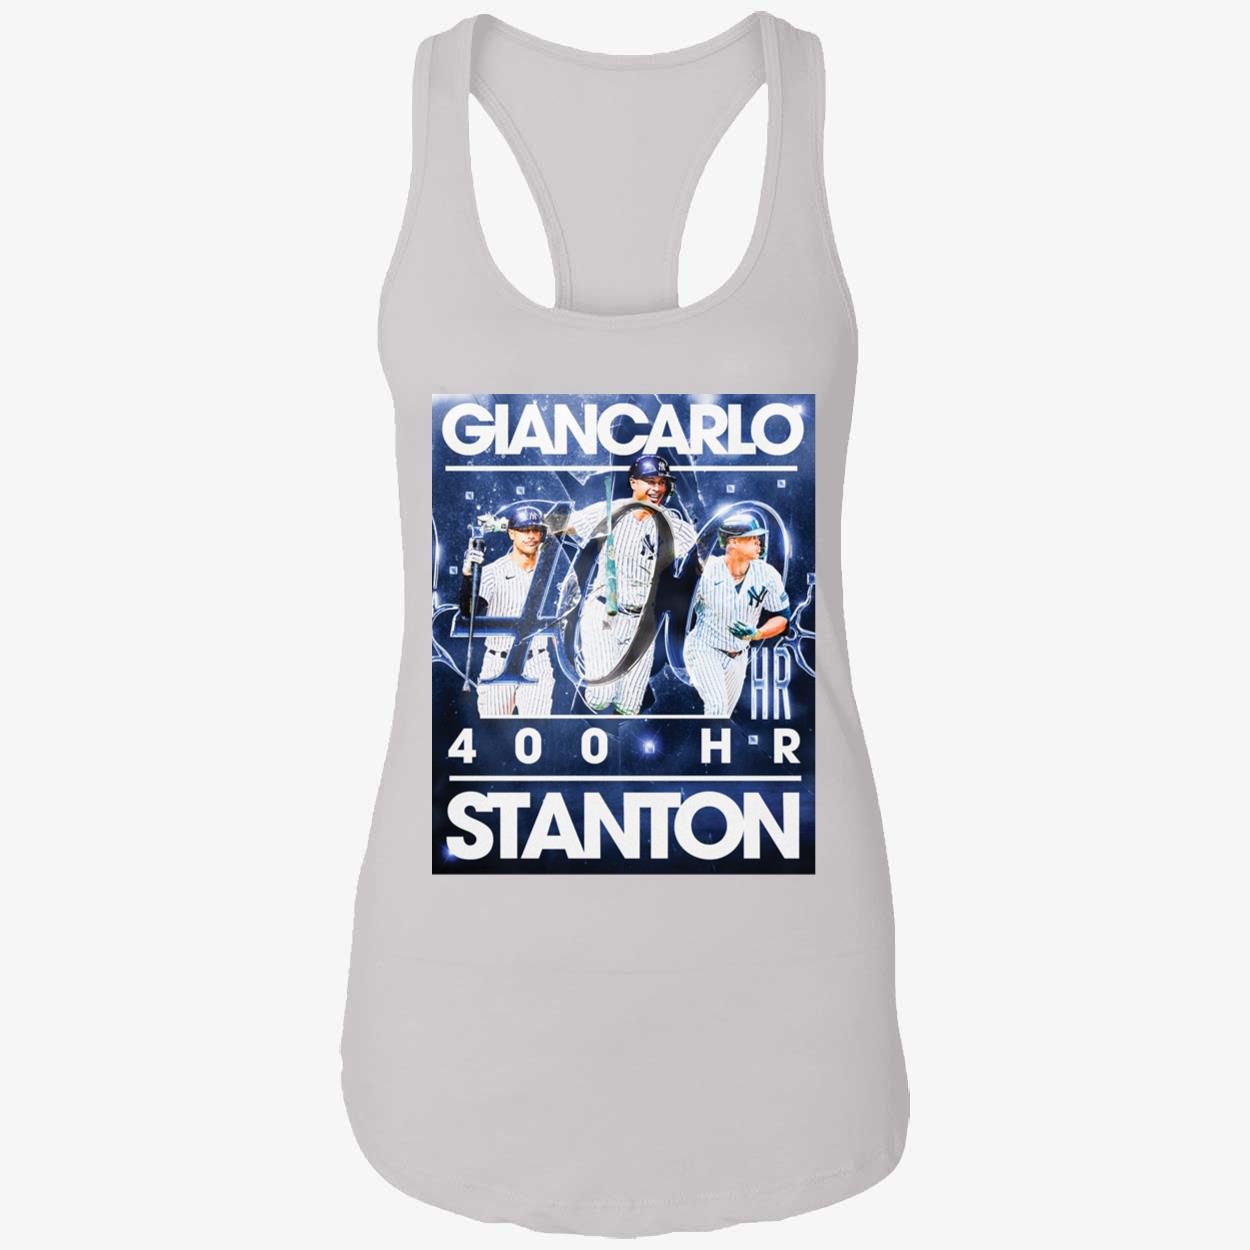 giancarlo stanton jersey youth